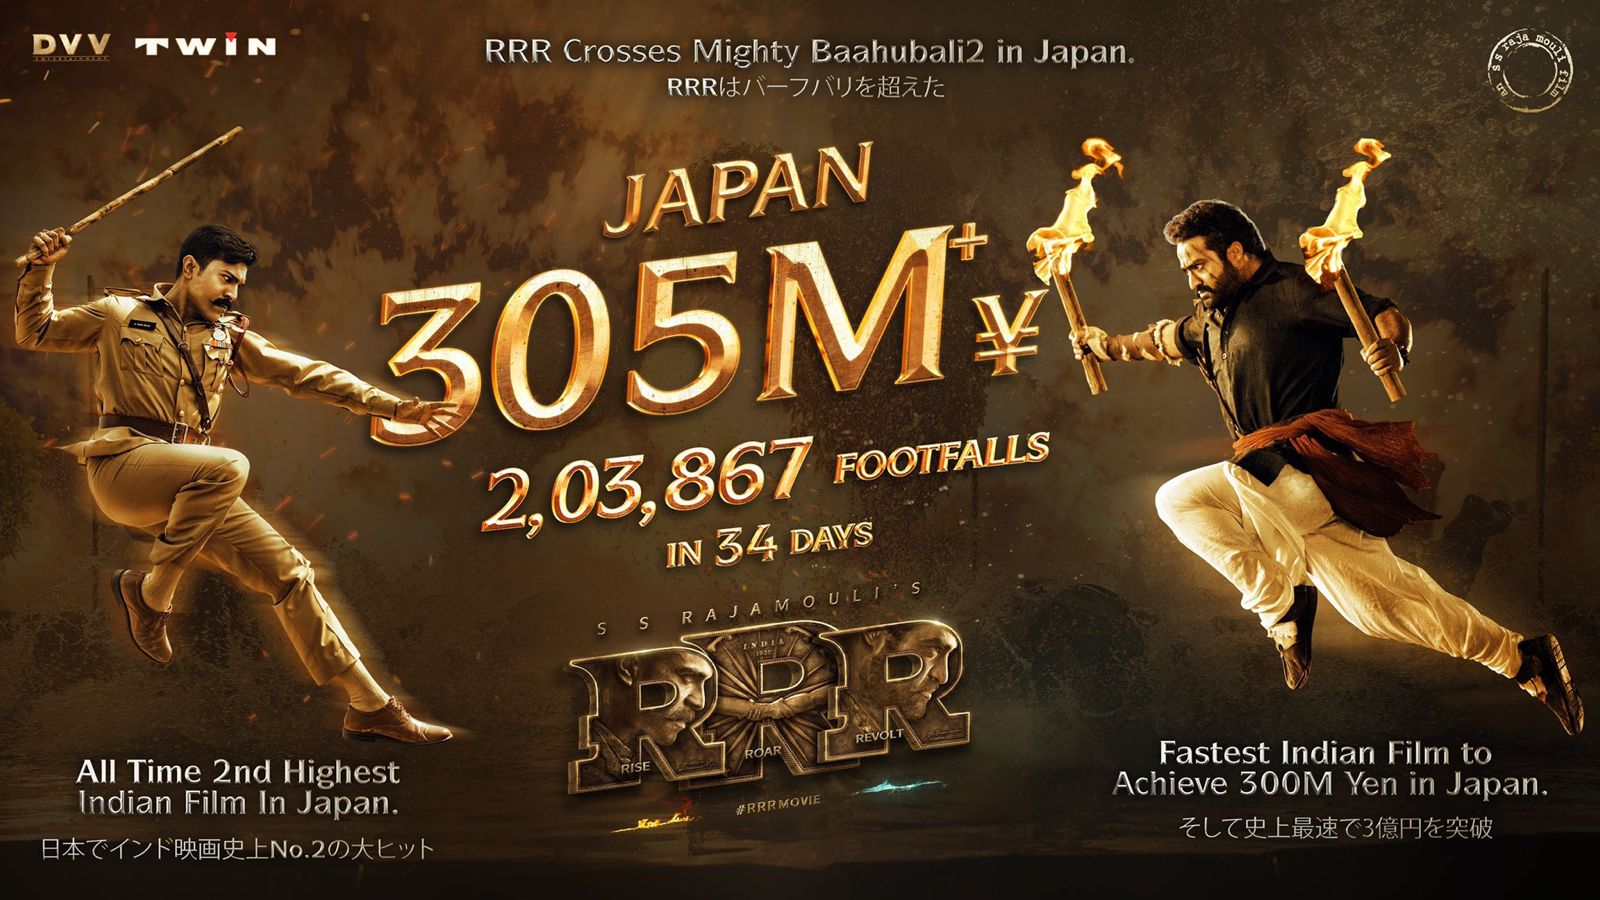 RRR Movie Beat Bahubali 2 Collection in Japan